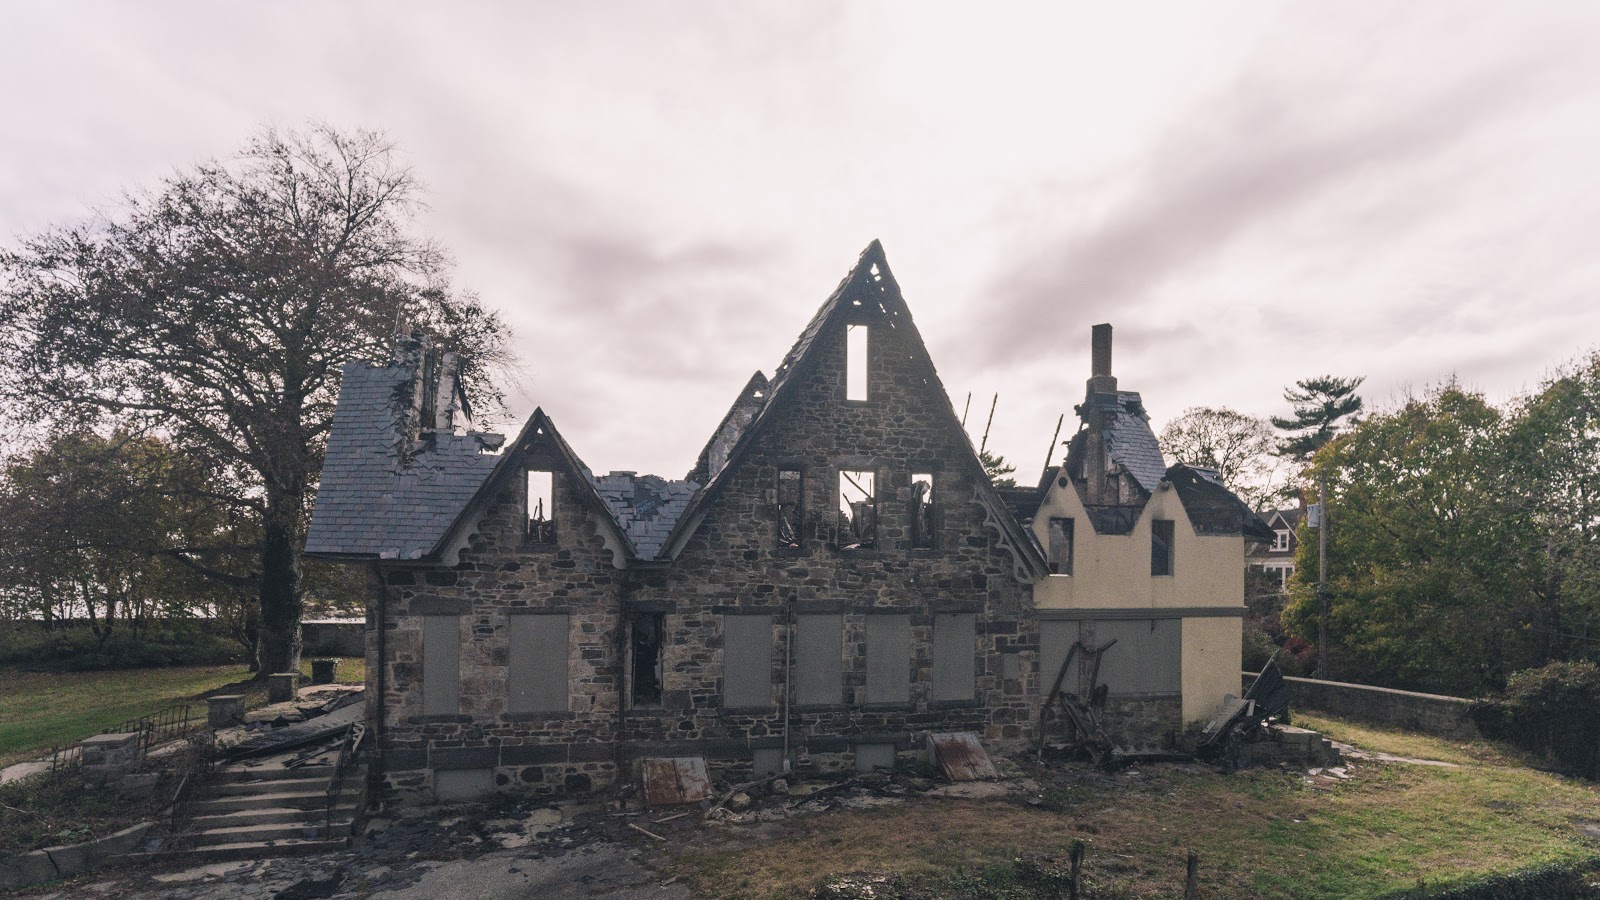 Wildcliff Mansion (Cyrus Lawton House) Revisit on Anniversary of Fire